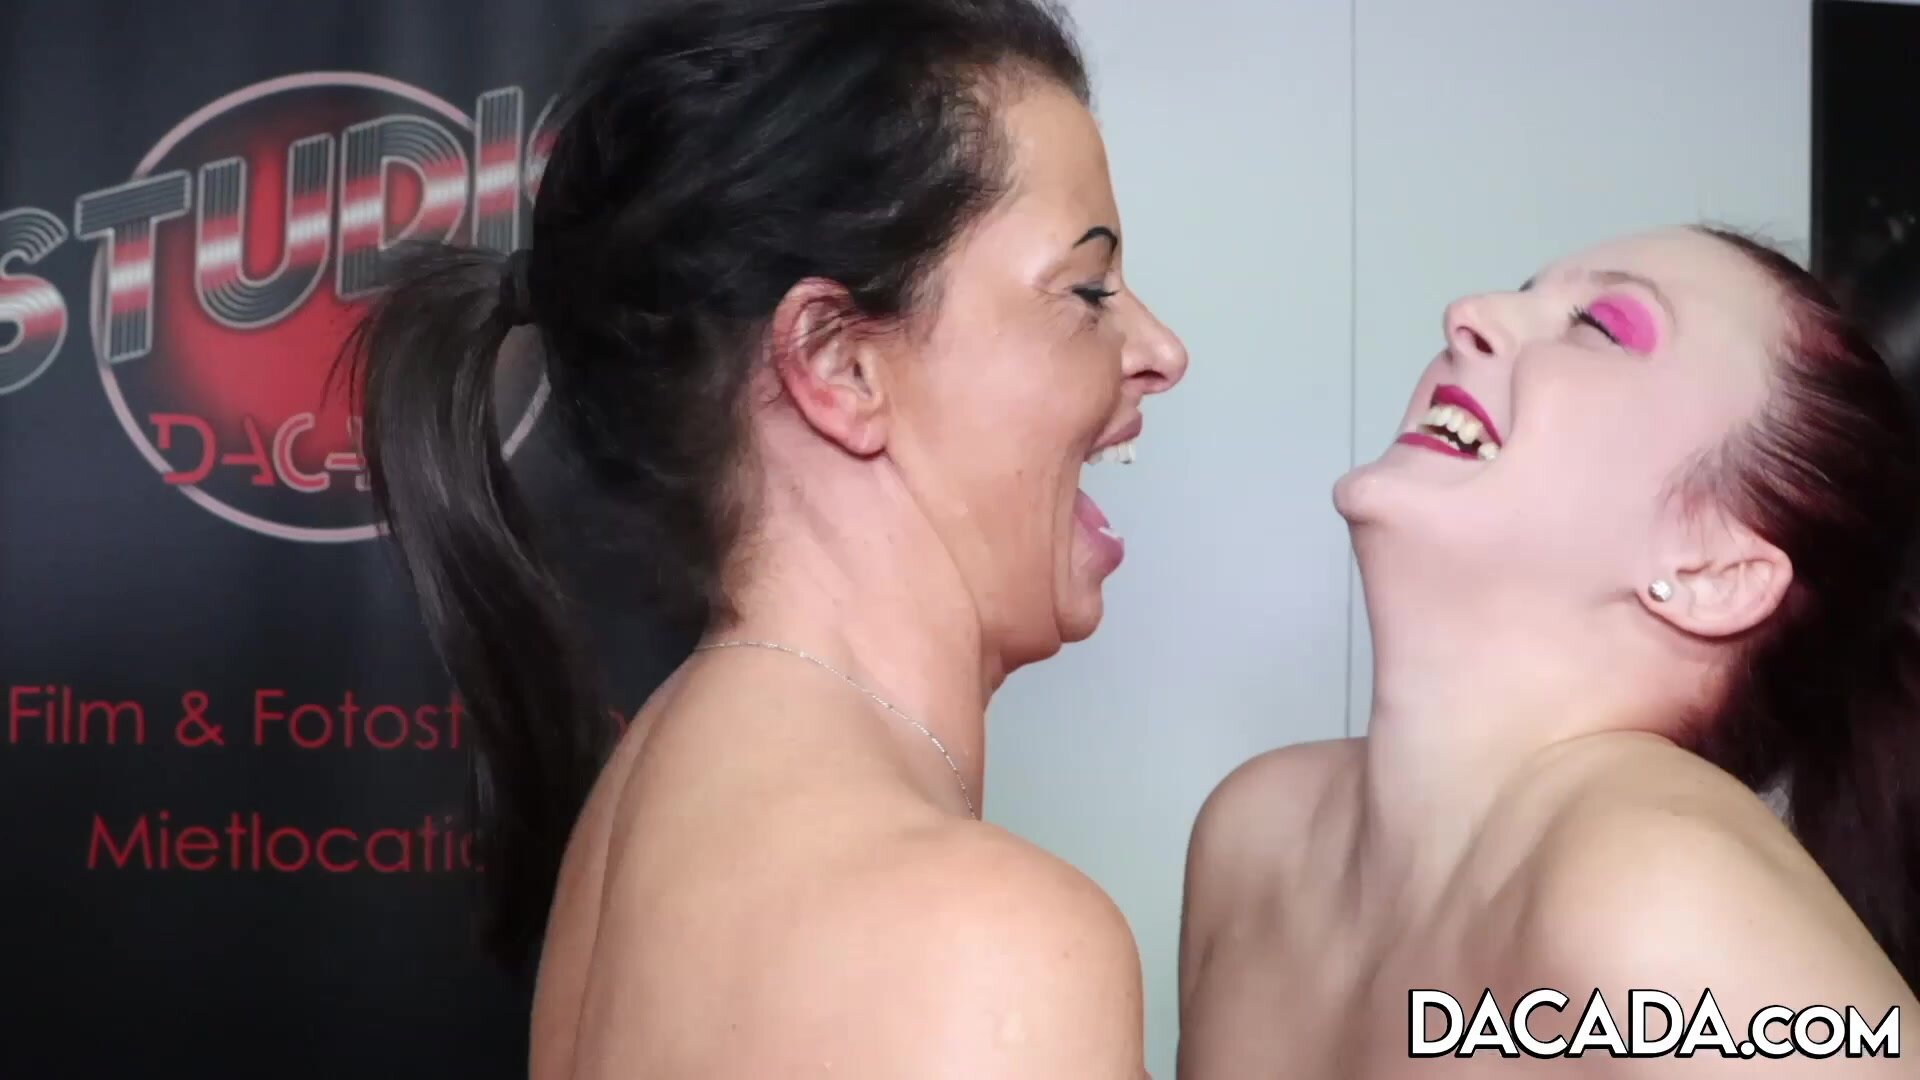 Gangbang fantasy with DaCada and Claire